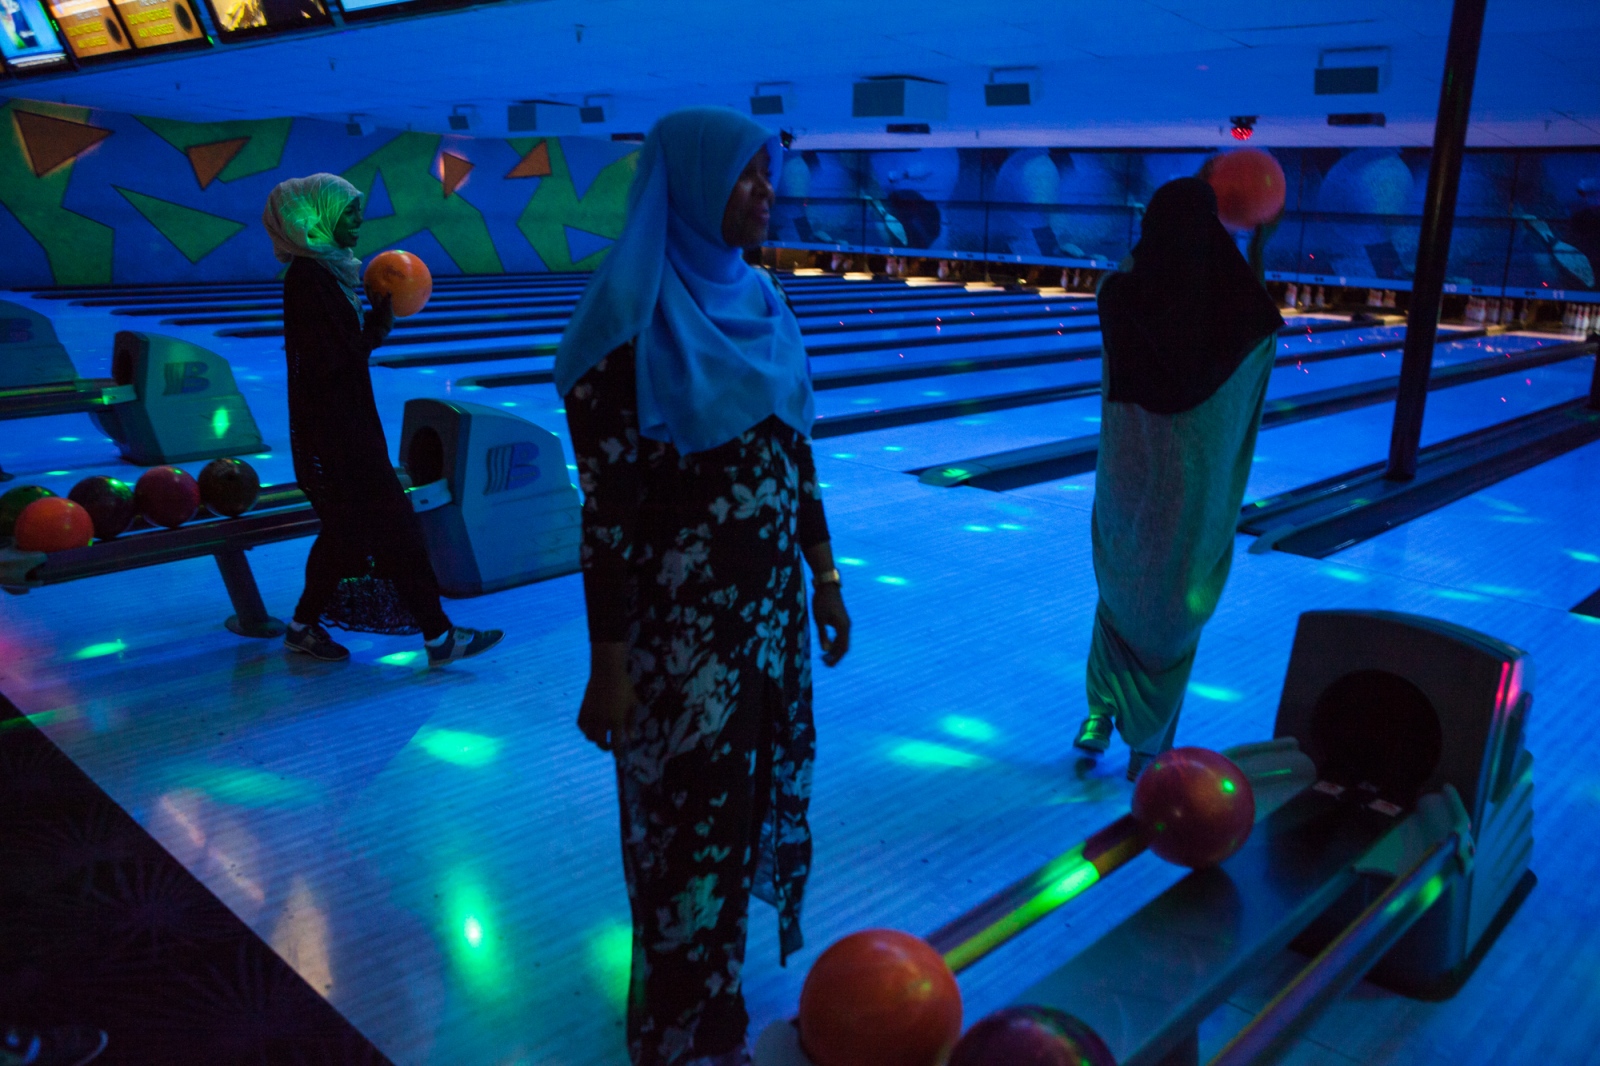  After dinner at the International House of Pancakes, a restaurant that is particularly popular among Somalis, a group of Somali friends go bowling. 